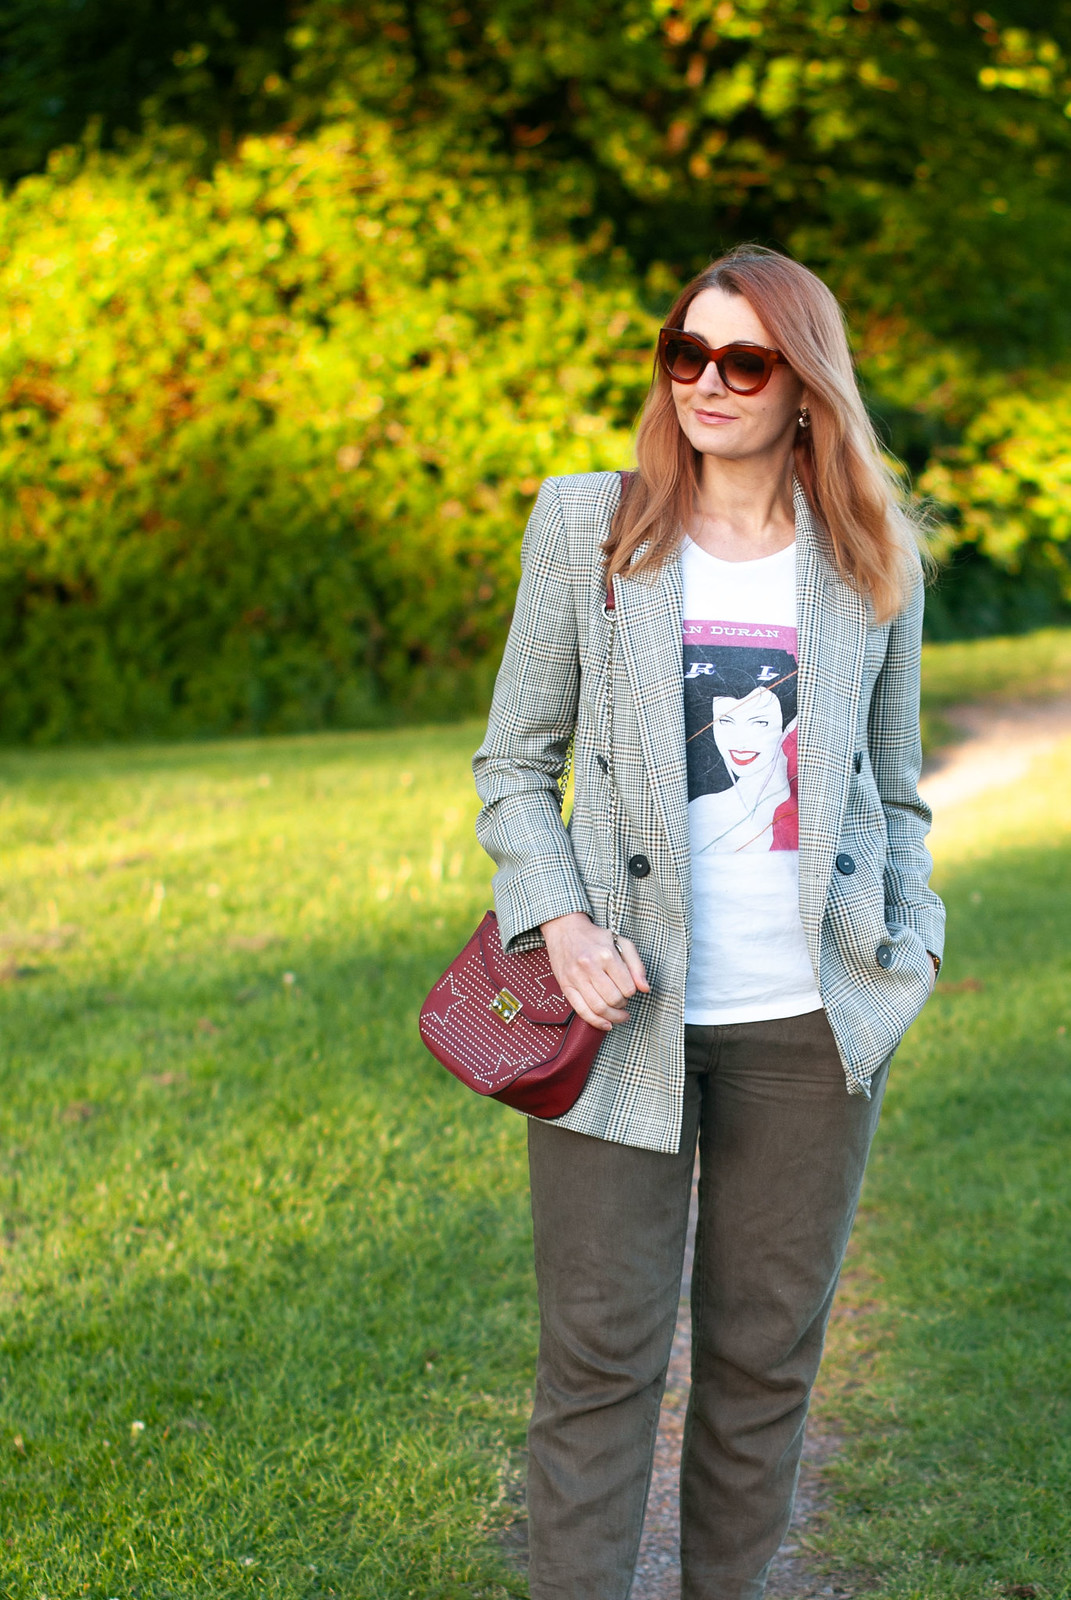 A Smart Casual Way to Style a Graphic T-shirt \ Duran Duran t-shirt \ Prince of Wales check blazer \ pointed flats \ baggy chinos | Not Dressed As Lamb, over 40 style